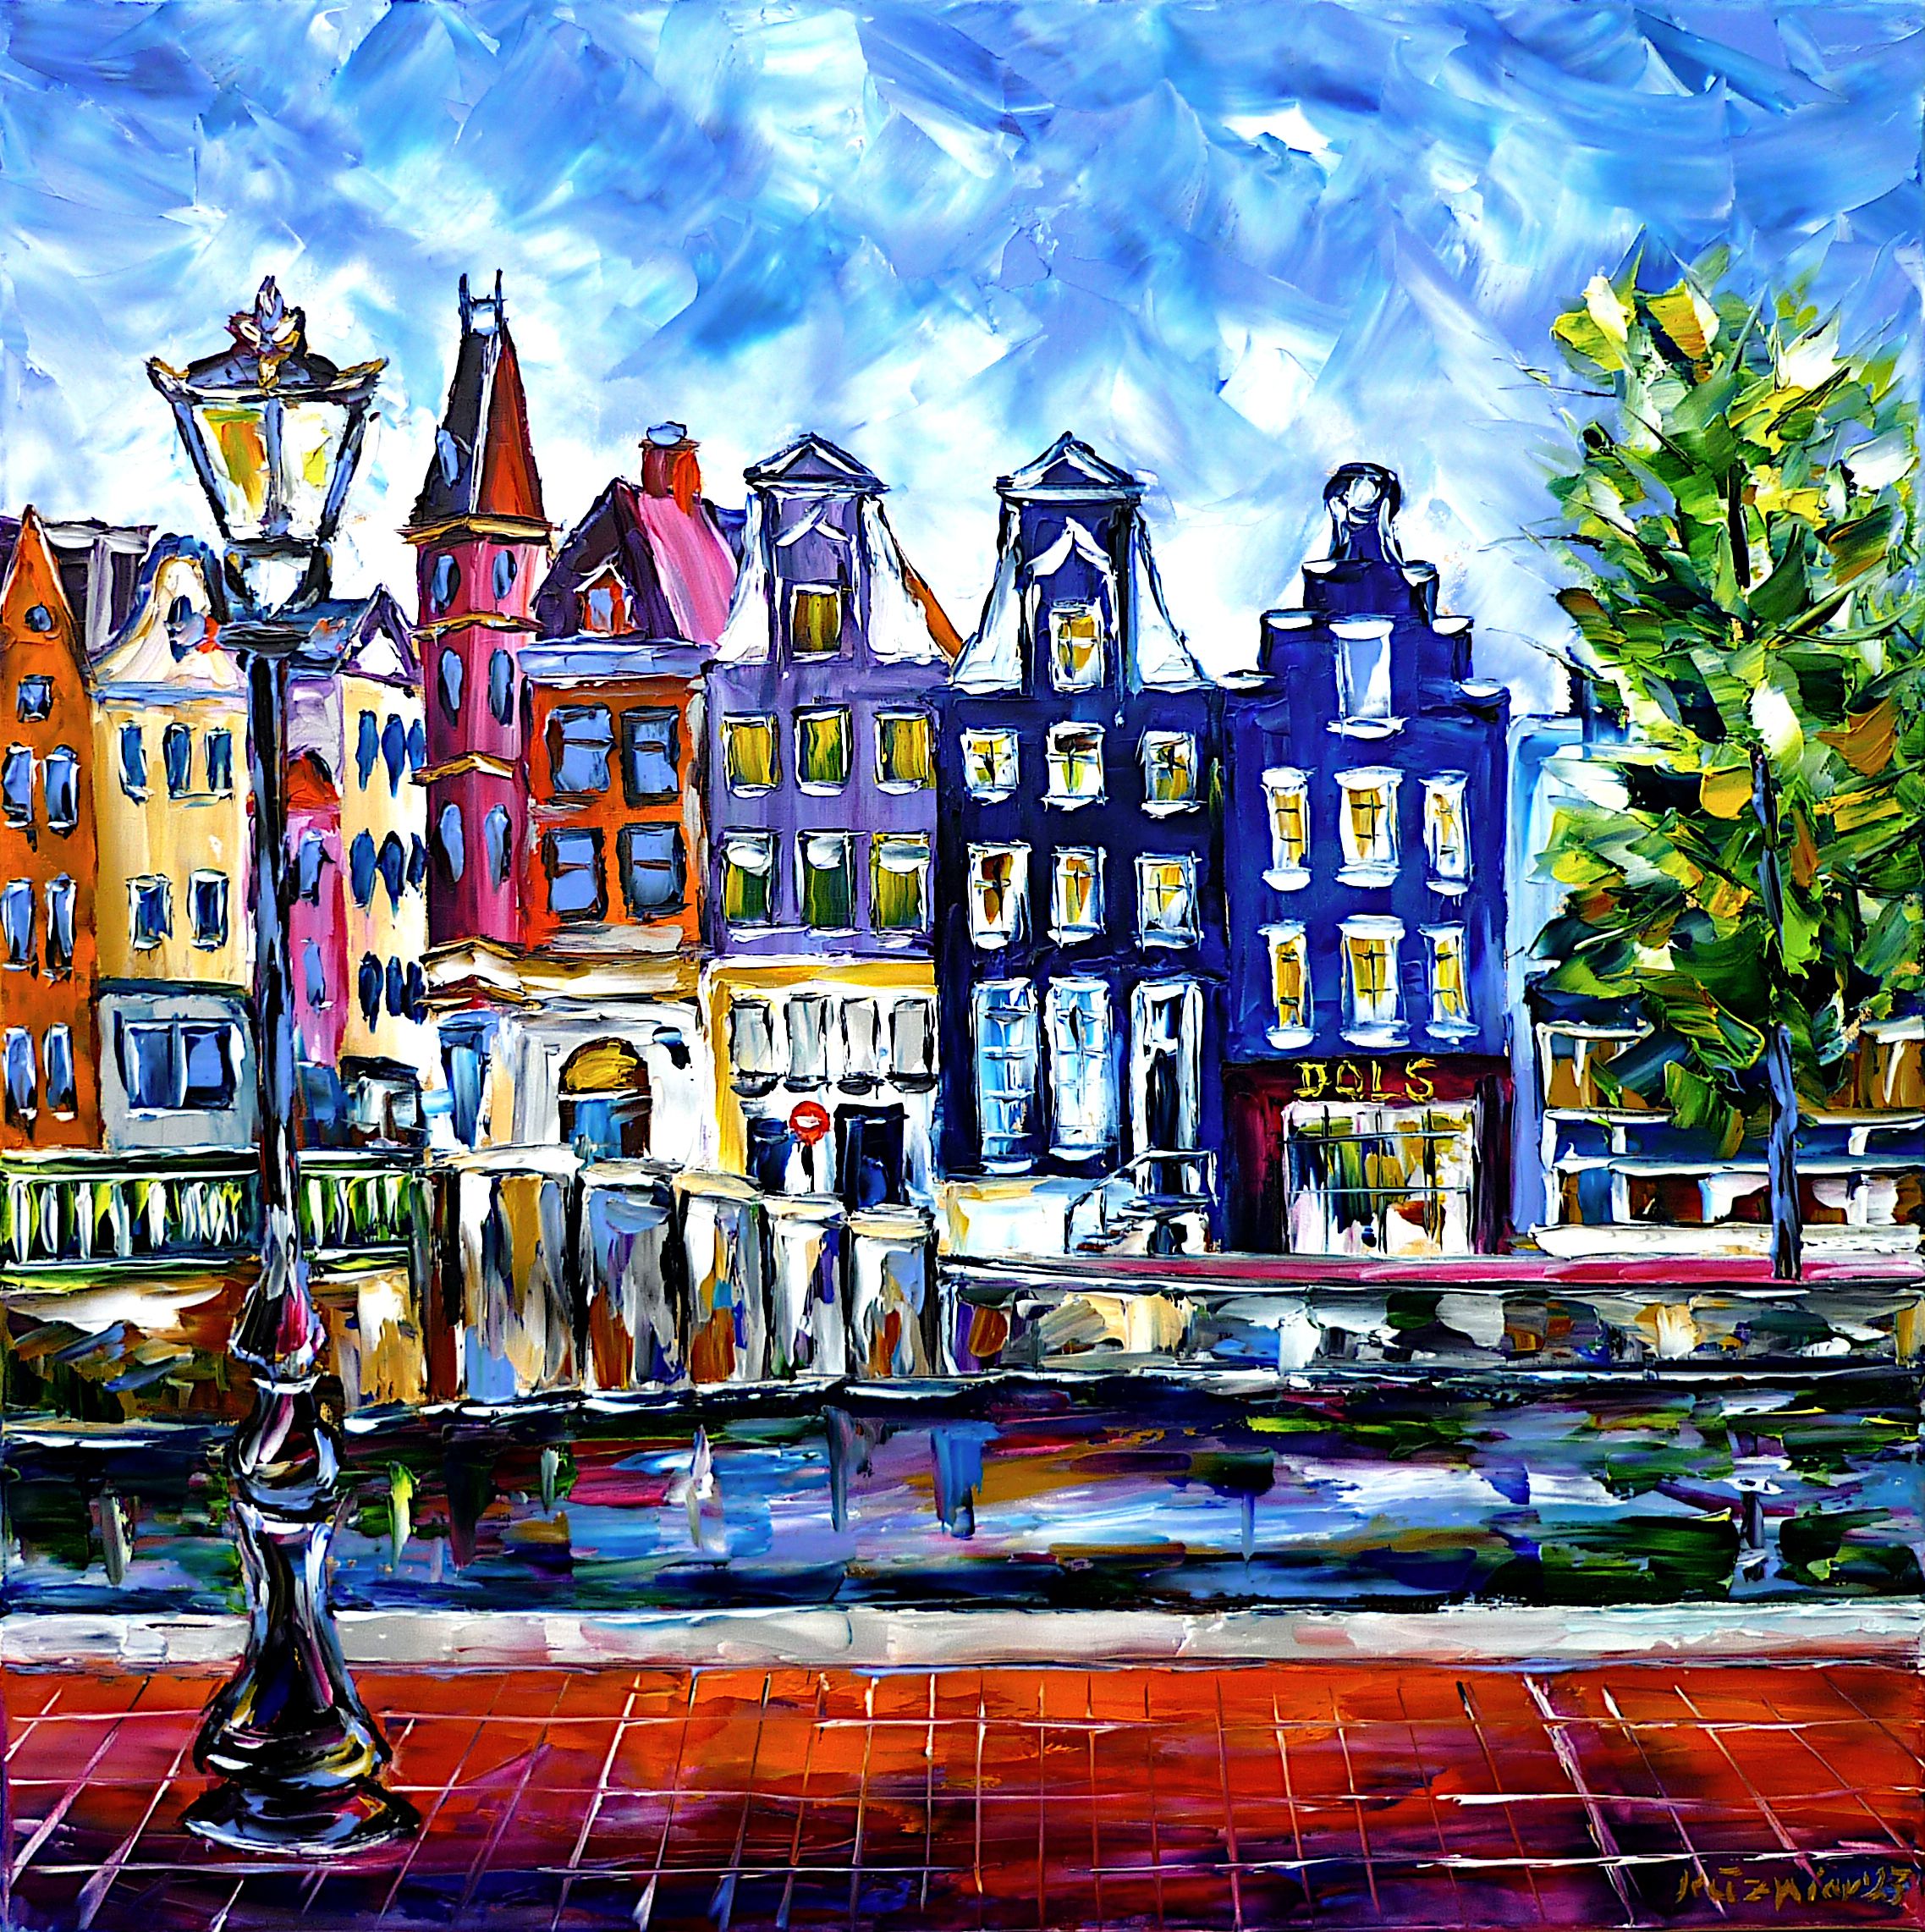 amsterdam picture,amsterdam painting,houses of amsterdam,amsterdam water canal,on the river bank,amsterdam canal bank,amsterdam lantern,street lamp,amsterdam canals,amsterdam river,amsterdam bridge,amsterdam art,colorful amsterdam,old amsterdam,beautiful amsterdam,colorful houses,amsterdam beauty,amsterdam love,amsterdam lovers,i love amsterdam,beautiful city,holland,netherlands,square painting,square format,square picture,palette knife oil painting,modern art,figurative art,figurative painting,contemporary painting,abstract painting,lively colors,colorful painting,bright colors,impasto painting